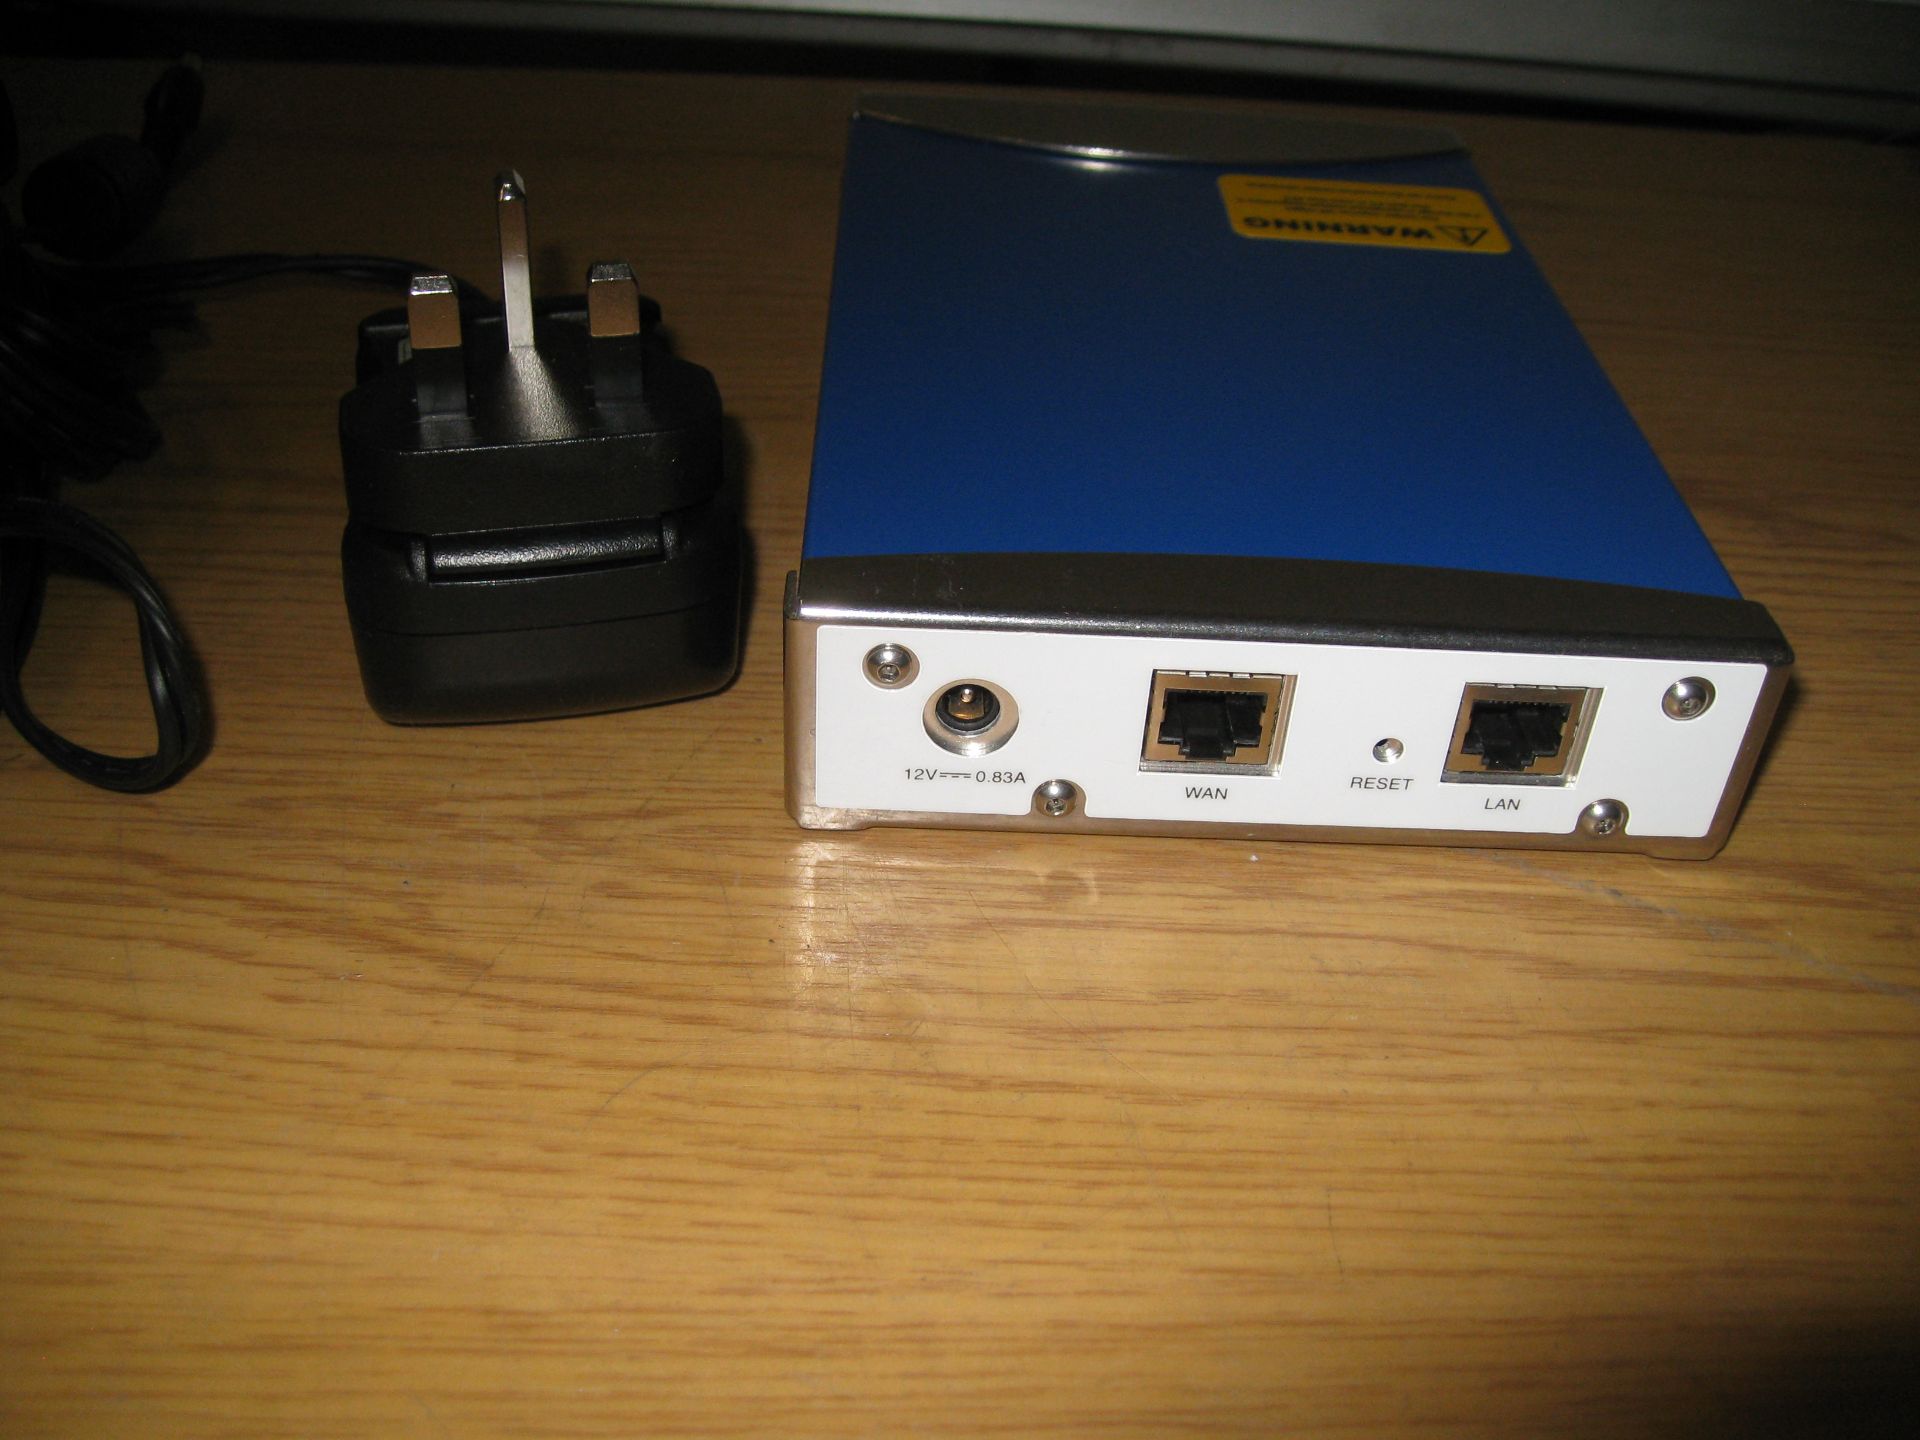 AEP Net Remote encryptor hardware VPN (virtual private network) client with psu. More info at: www. - Image 2 of 3